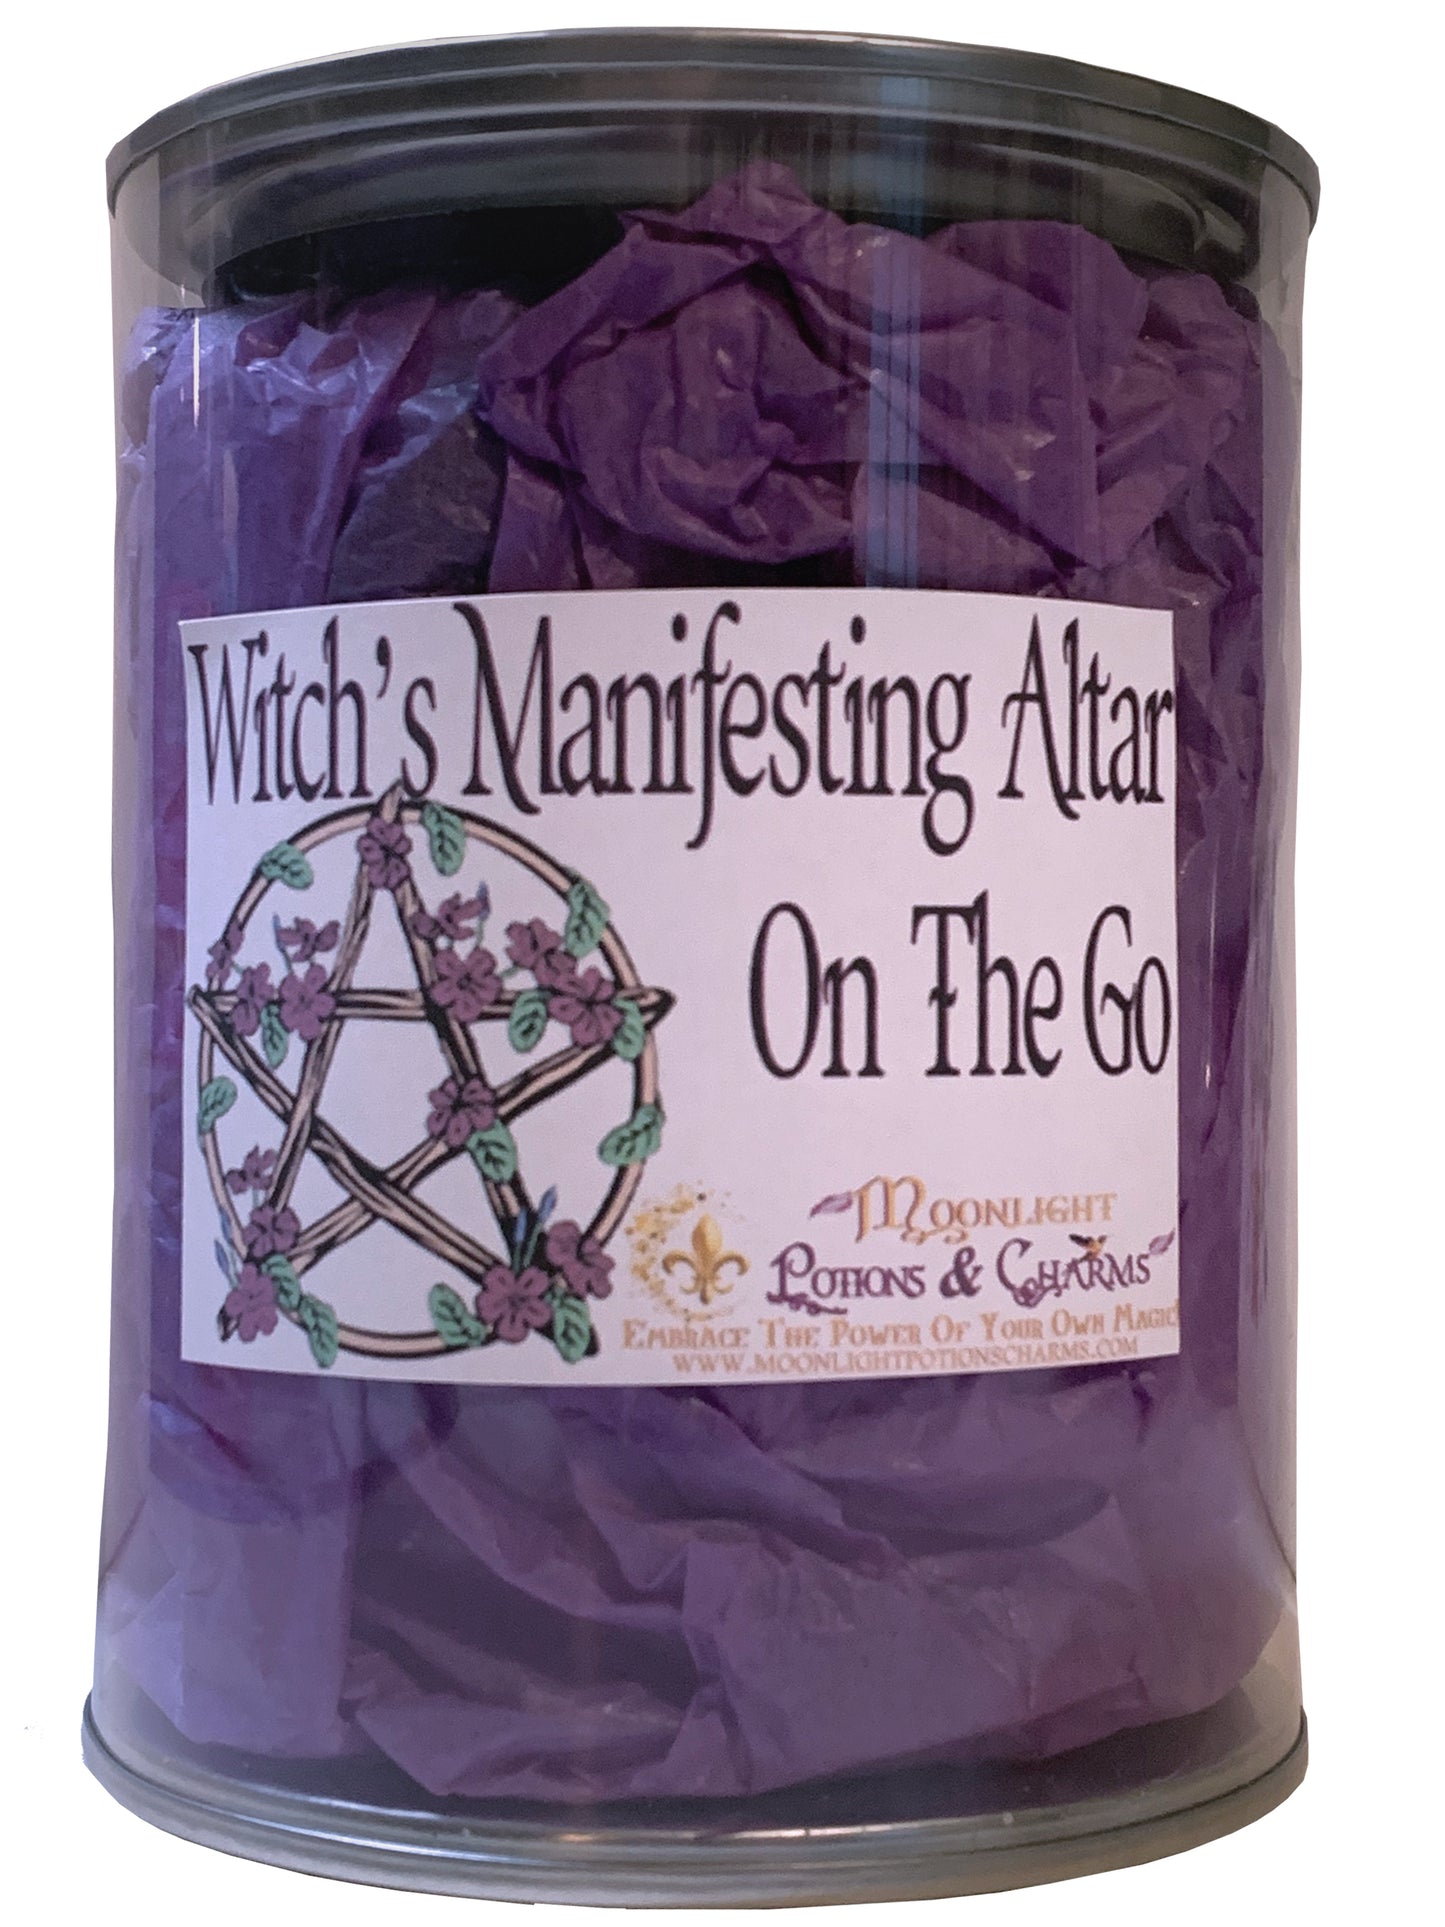 Witch's Manifesting Altar On The Go, Pail - Moonlight Potions & Charms